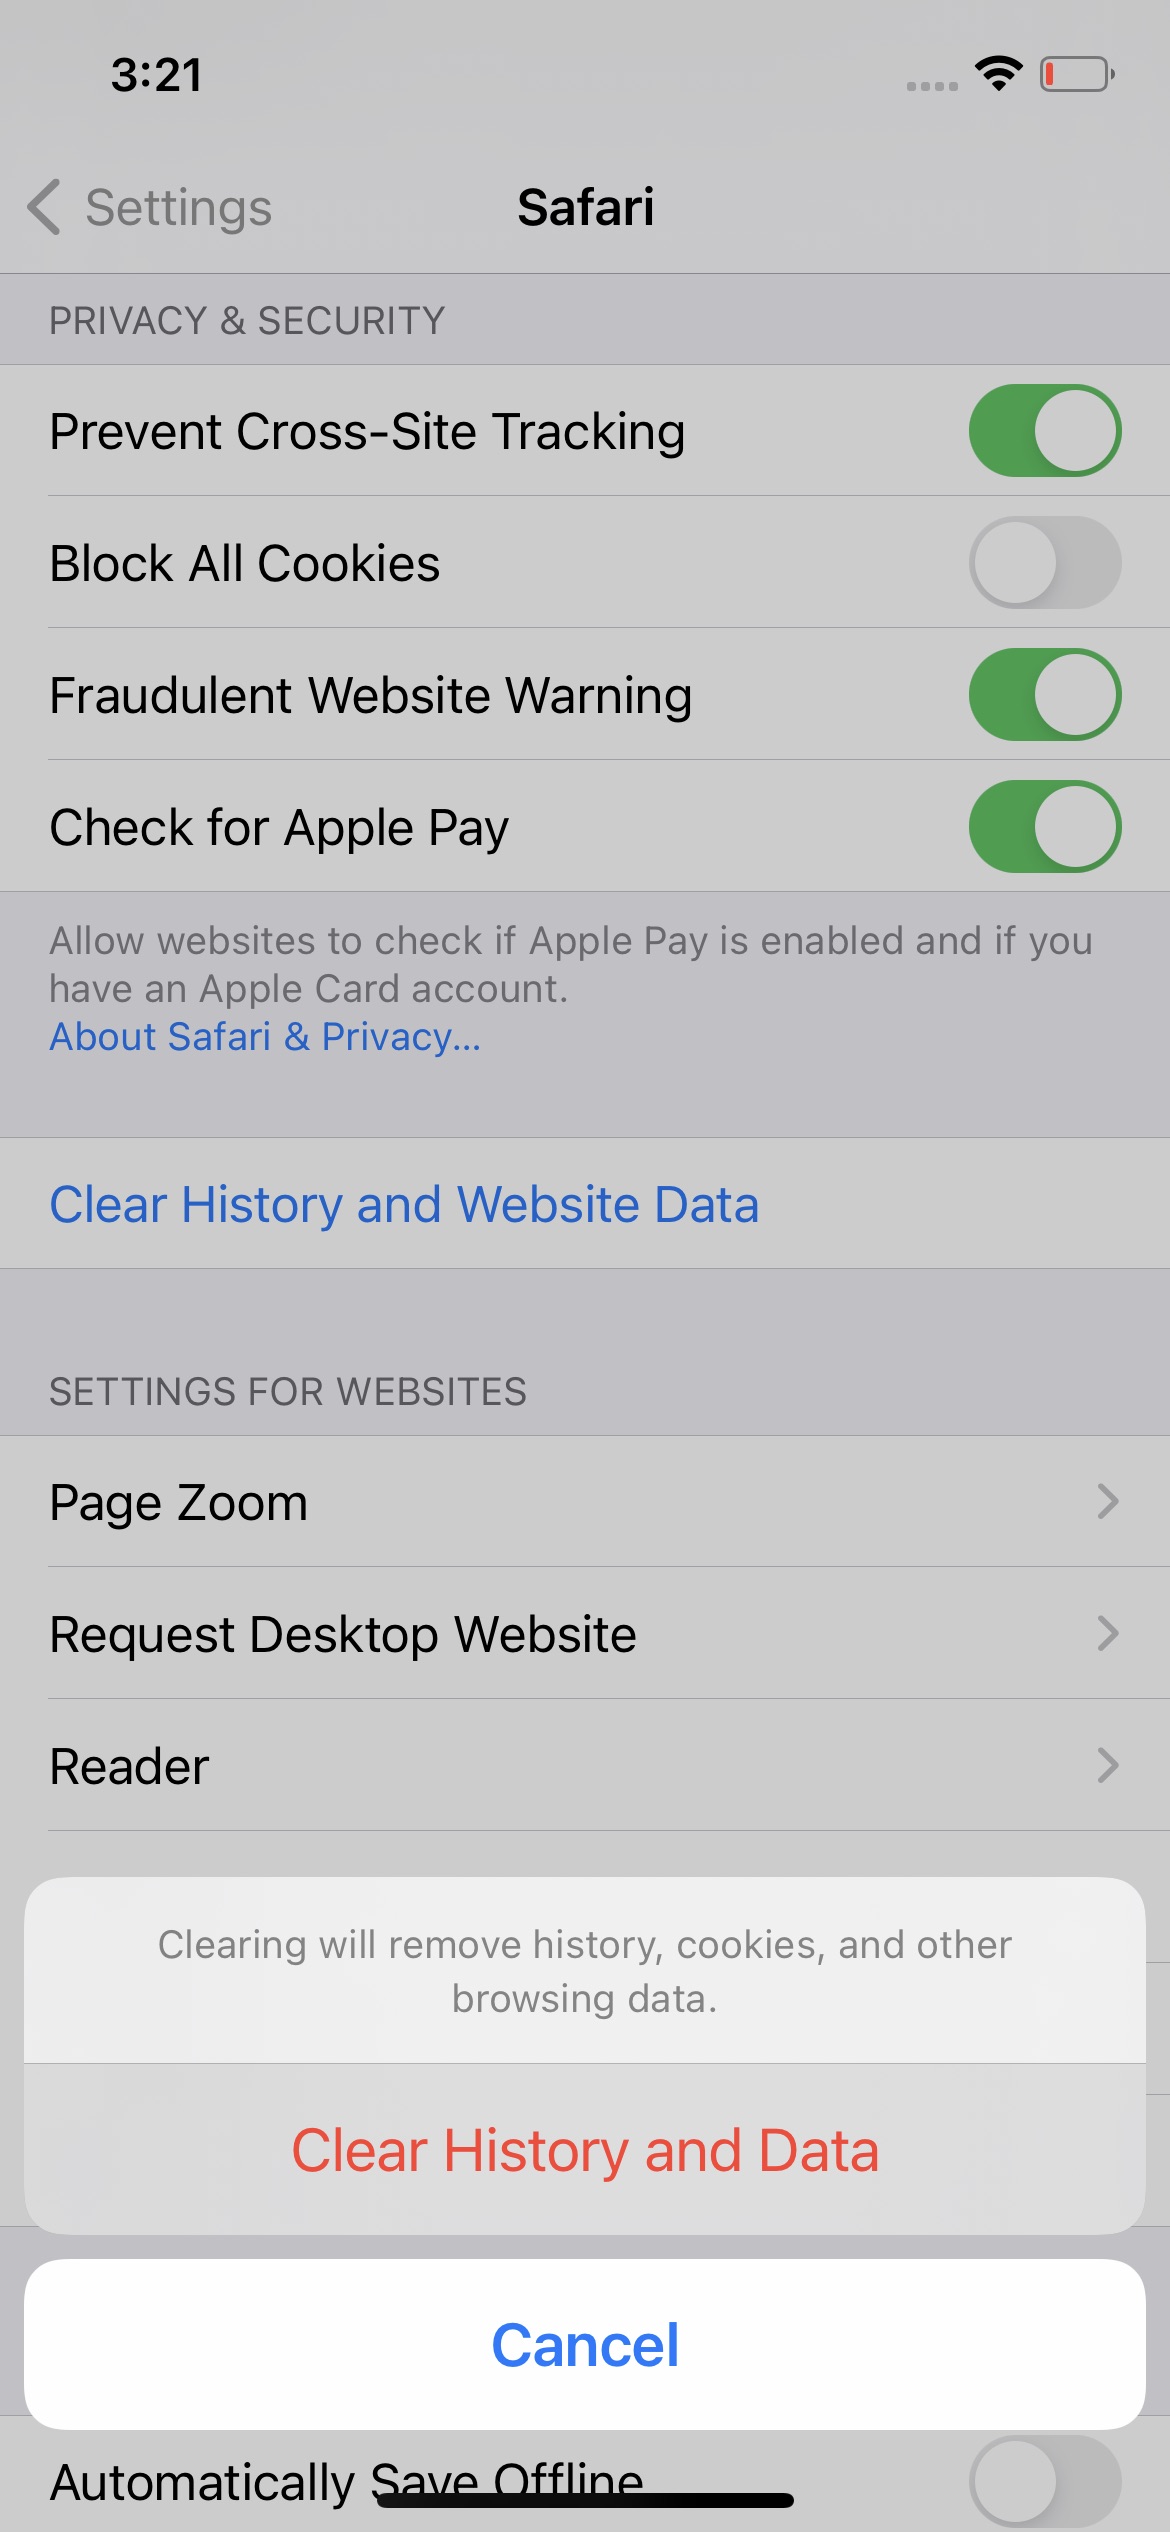 How to Clear History, Cache, and Cookies on Your iPhone [Video]